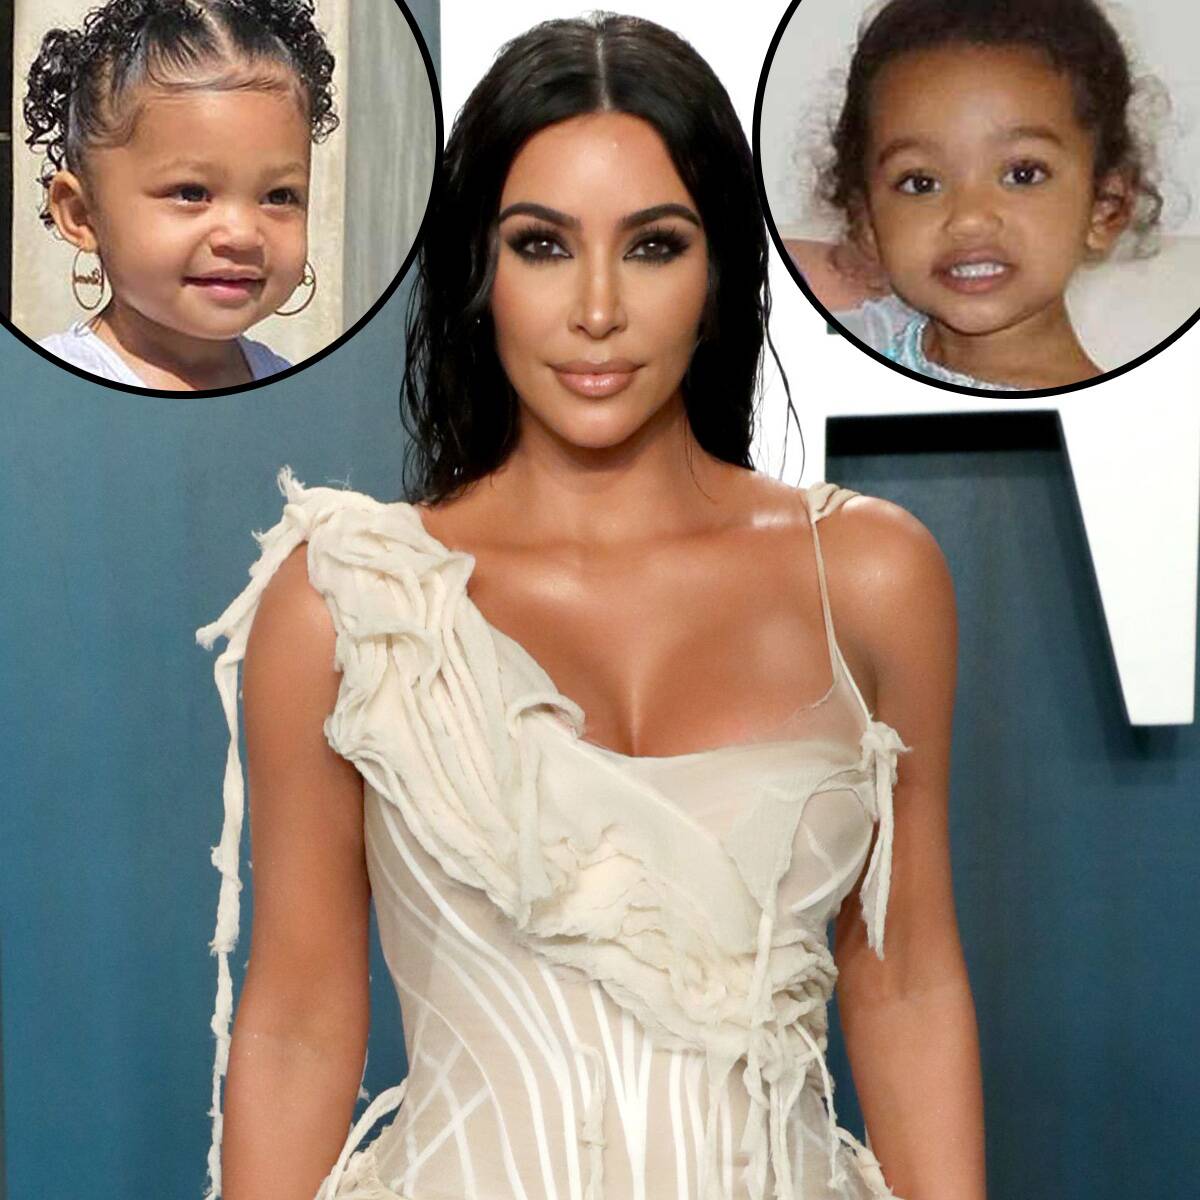 Kim Kardashian's New TBT Pic of Chicago West & Stormi Webster Is Too Cute